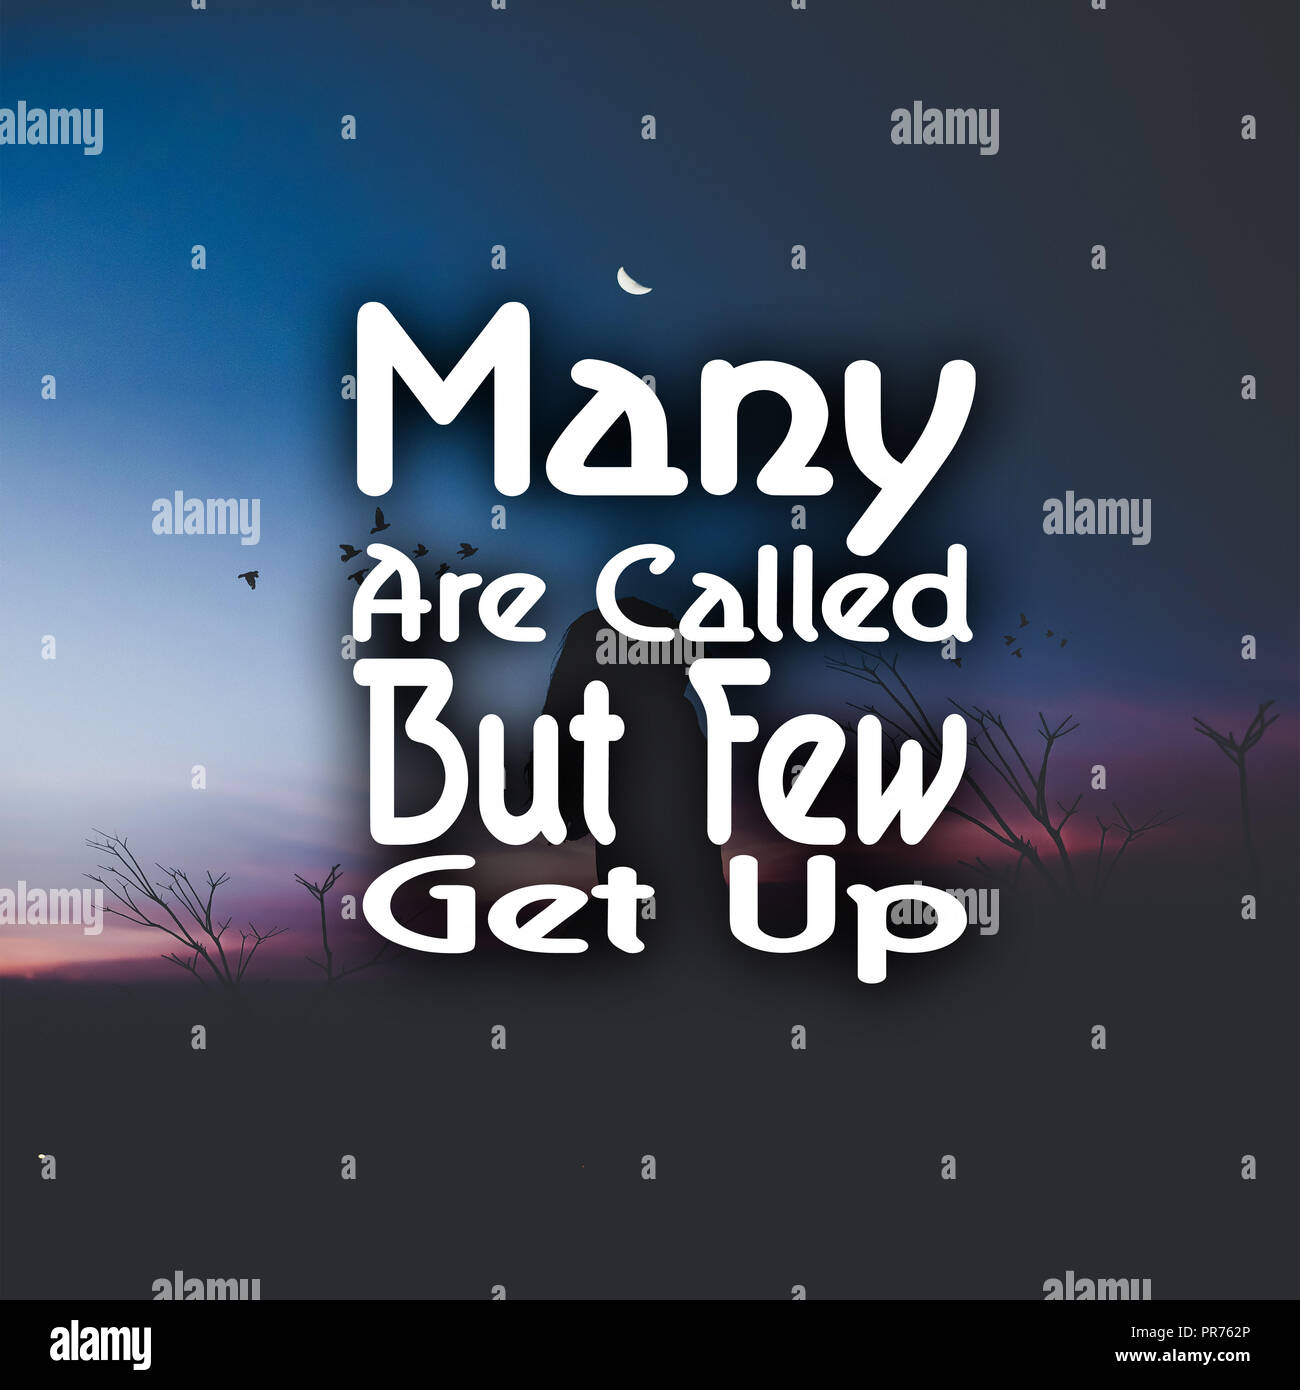 Inspirational Quotes Many are called but few get up, positive ...